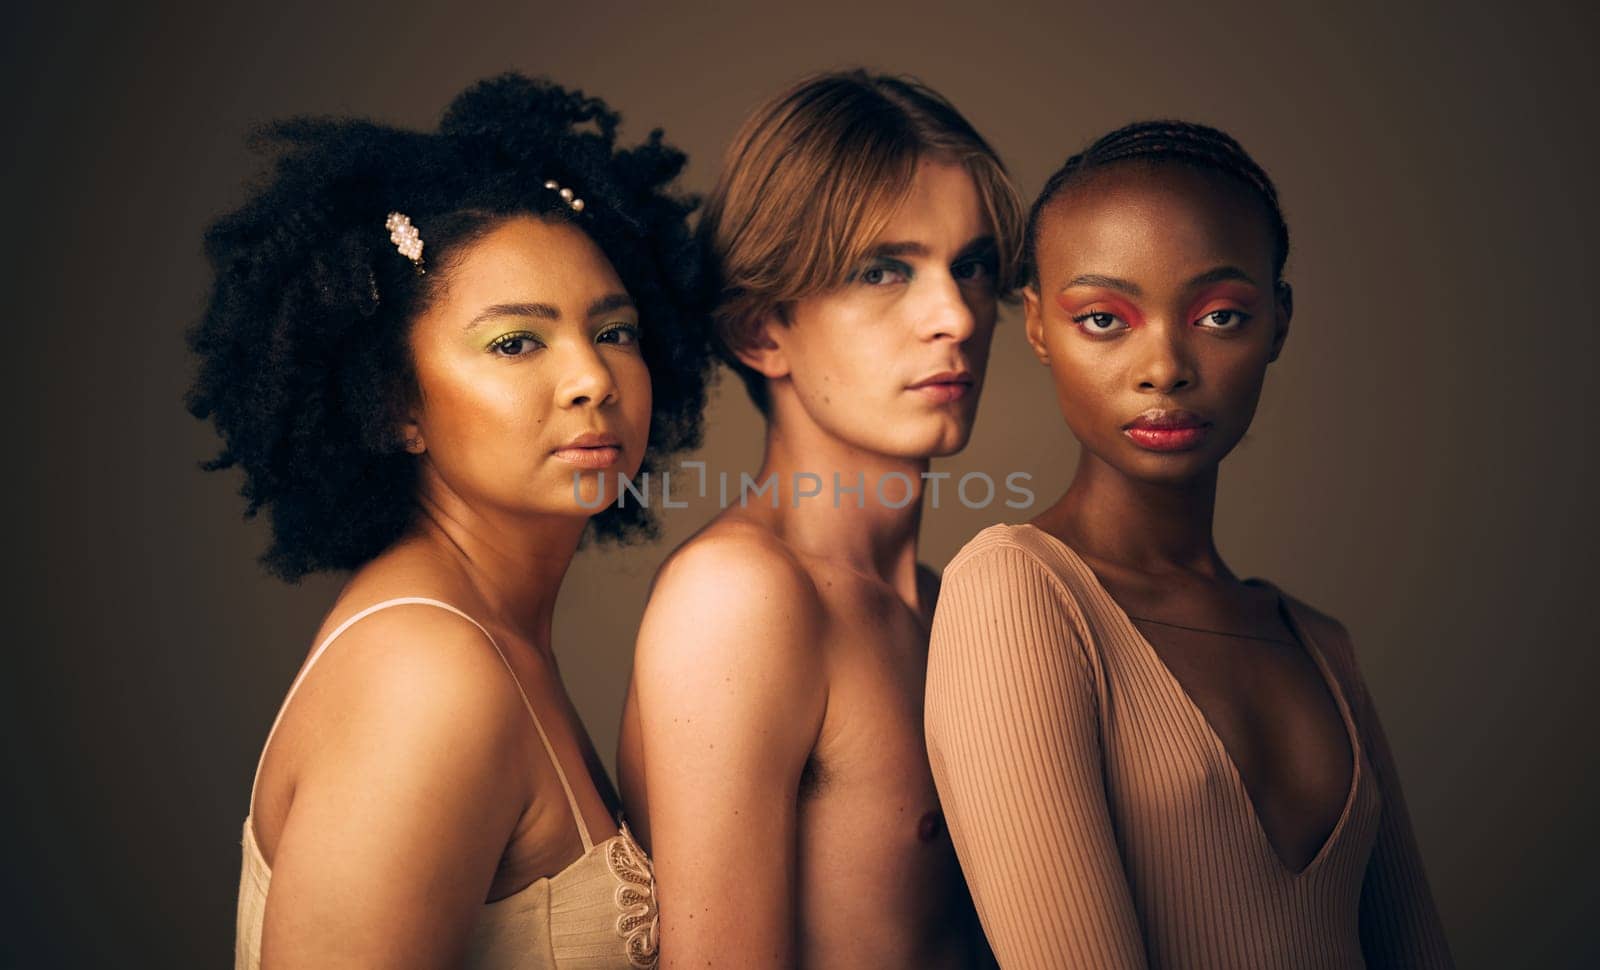 Portrait, beauty or skincare with a man and women in studio on a dark background for makeup or cosmetics. Face, friends and diversity with confident young people posing for inclusion or freedom.